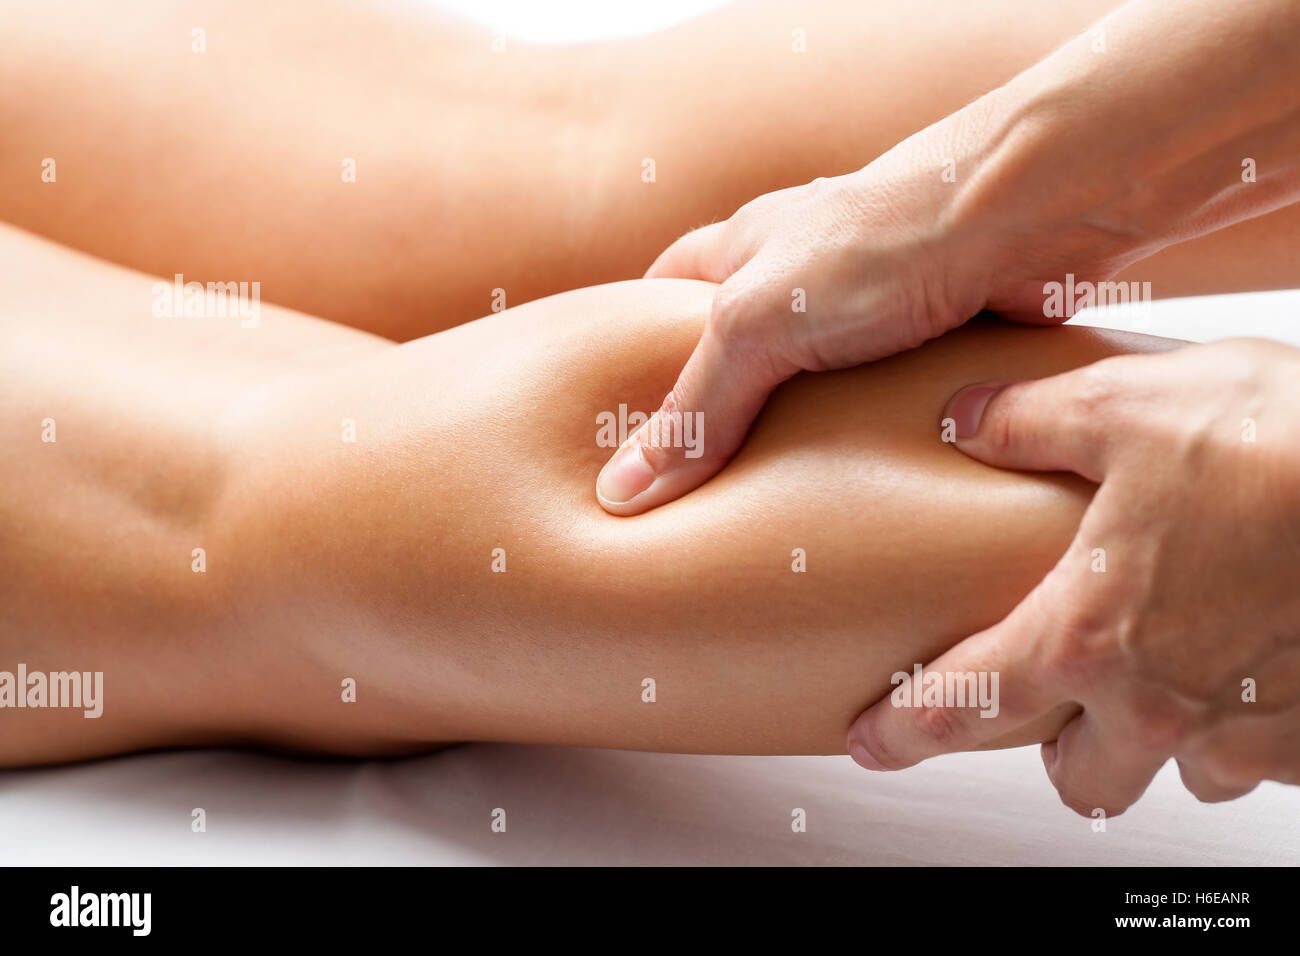 Extreme close up of osteopath applying pressure with thumb on female calf muscle. Stock Photo